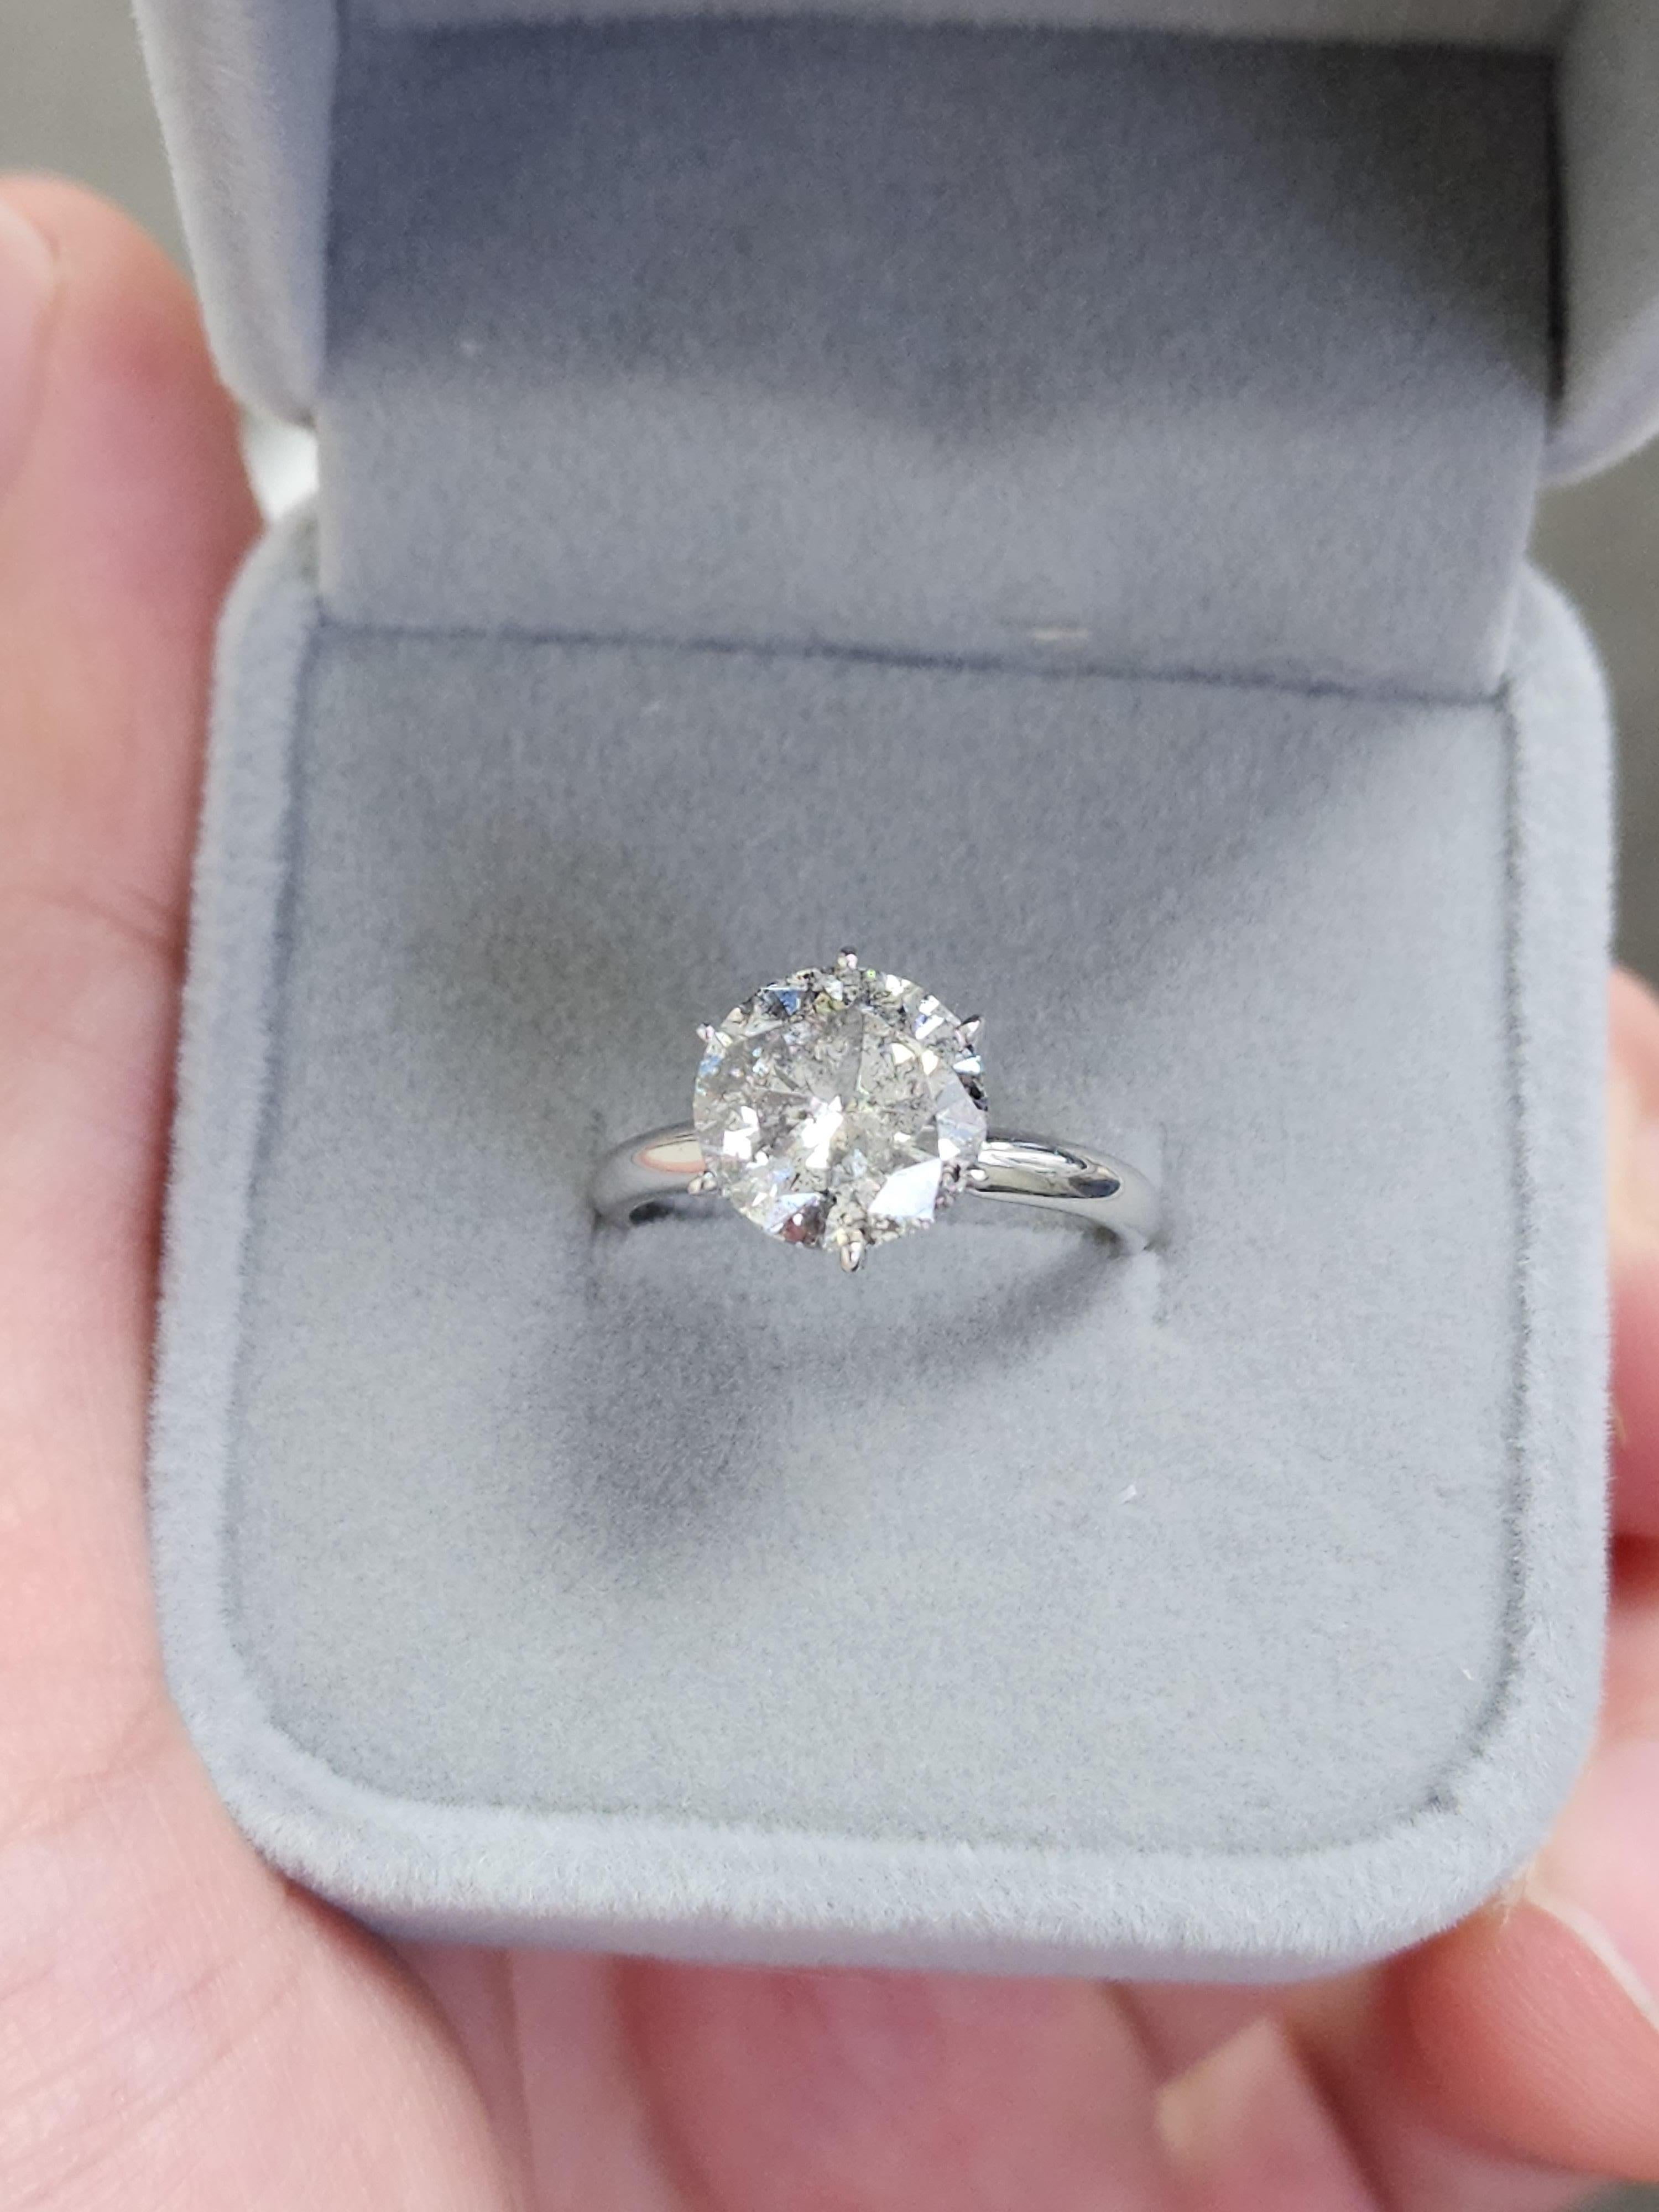 3.14 ct round brilliant cut natural diamonds. 6 prong solitaire setting, set in 14k white gold. Ring Size 6.5. 